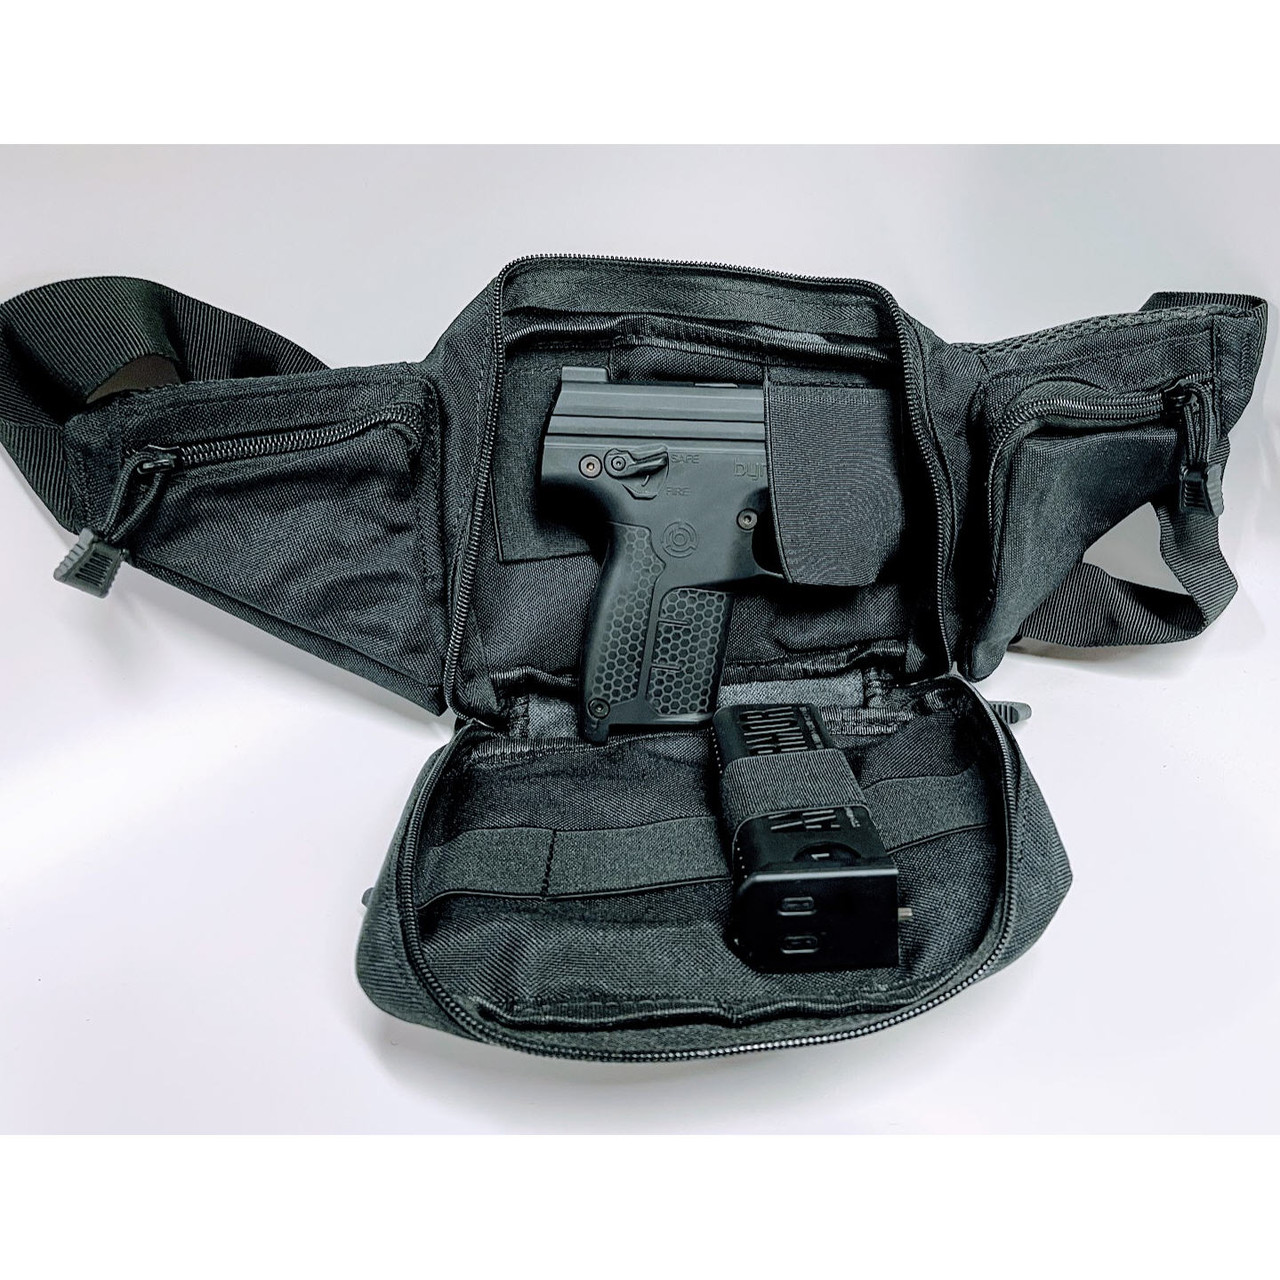 Military Style Concealed Carry Waist Bag Tactical Conceal Carry